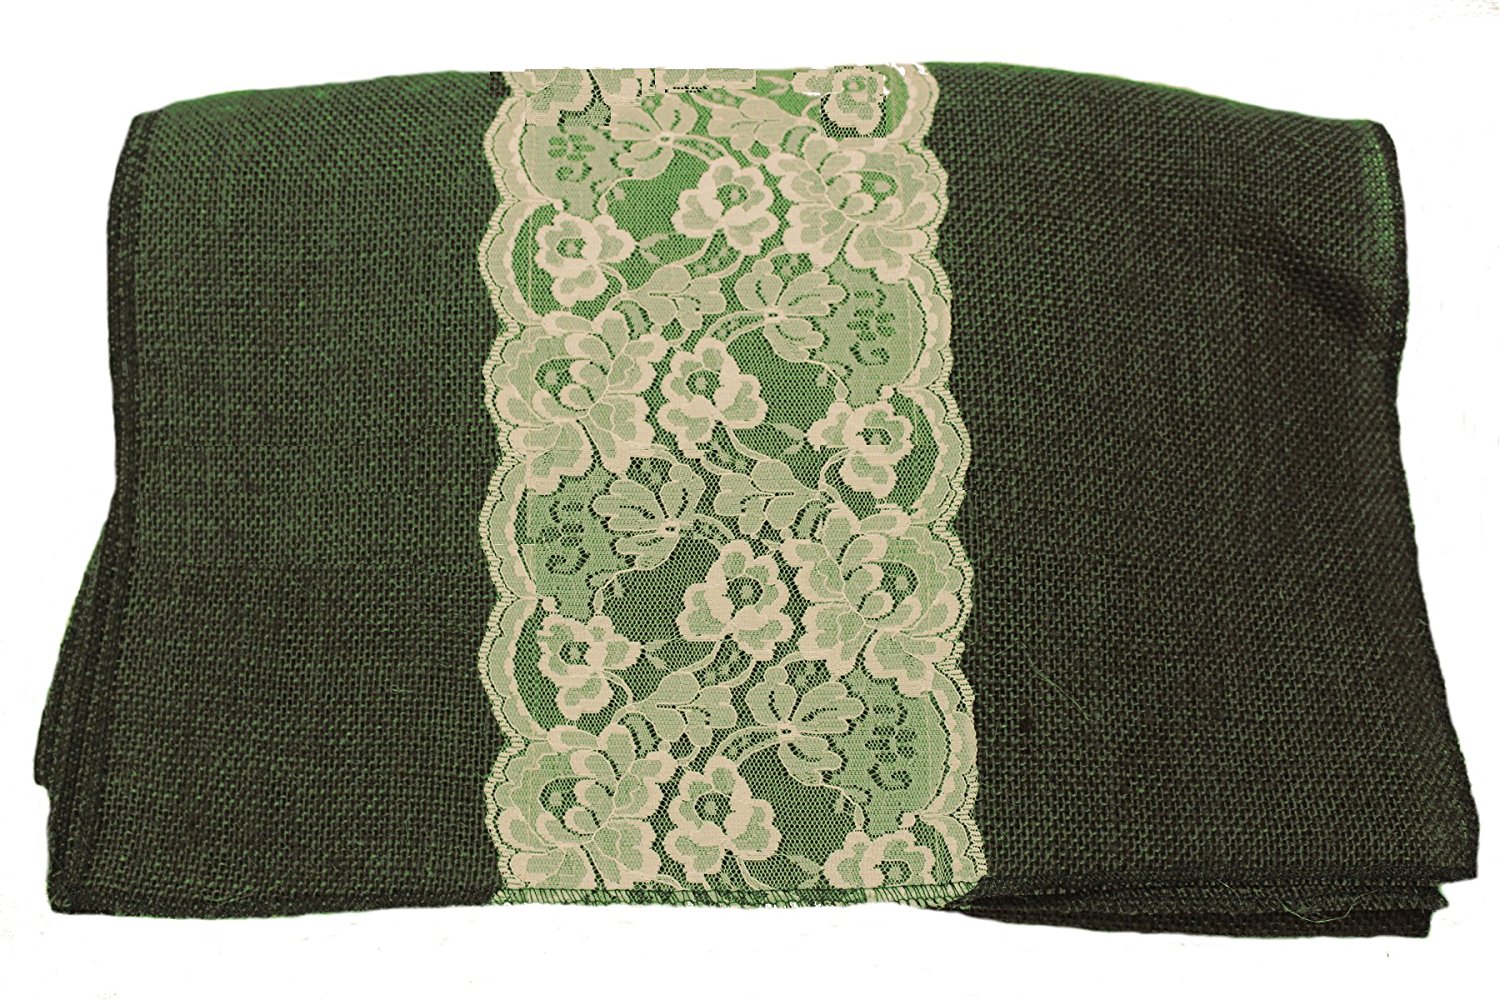 14" Hunter Green Burlap Runner with 6" White Lace